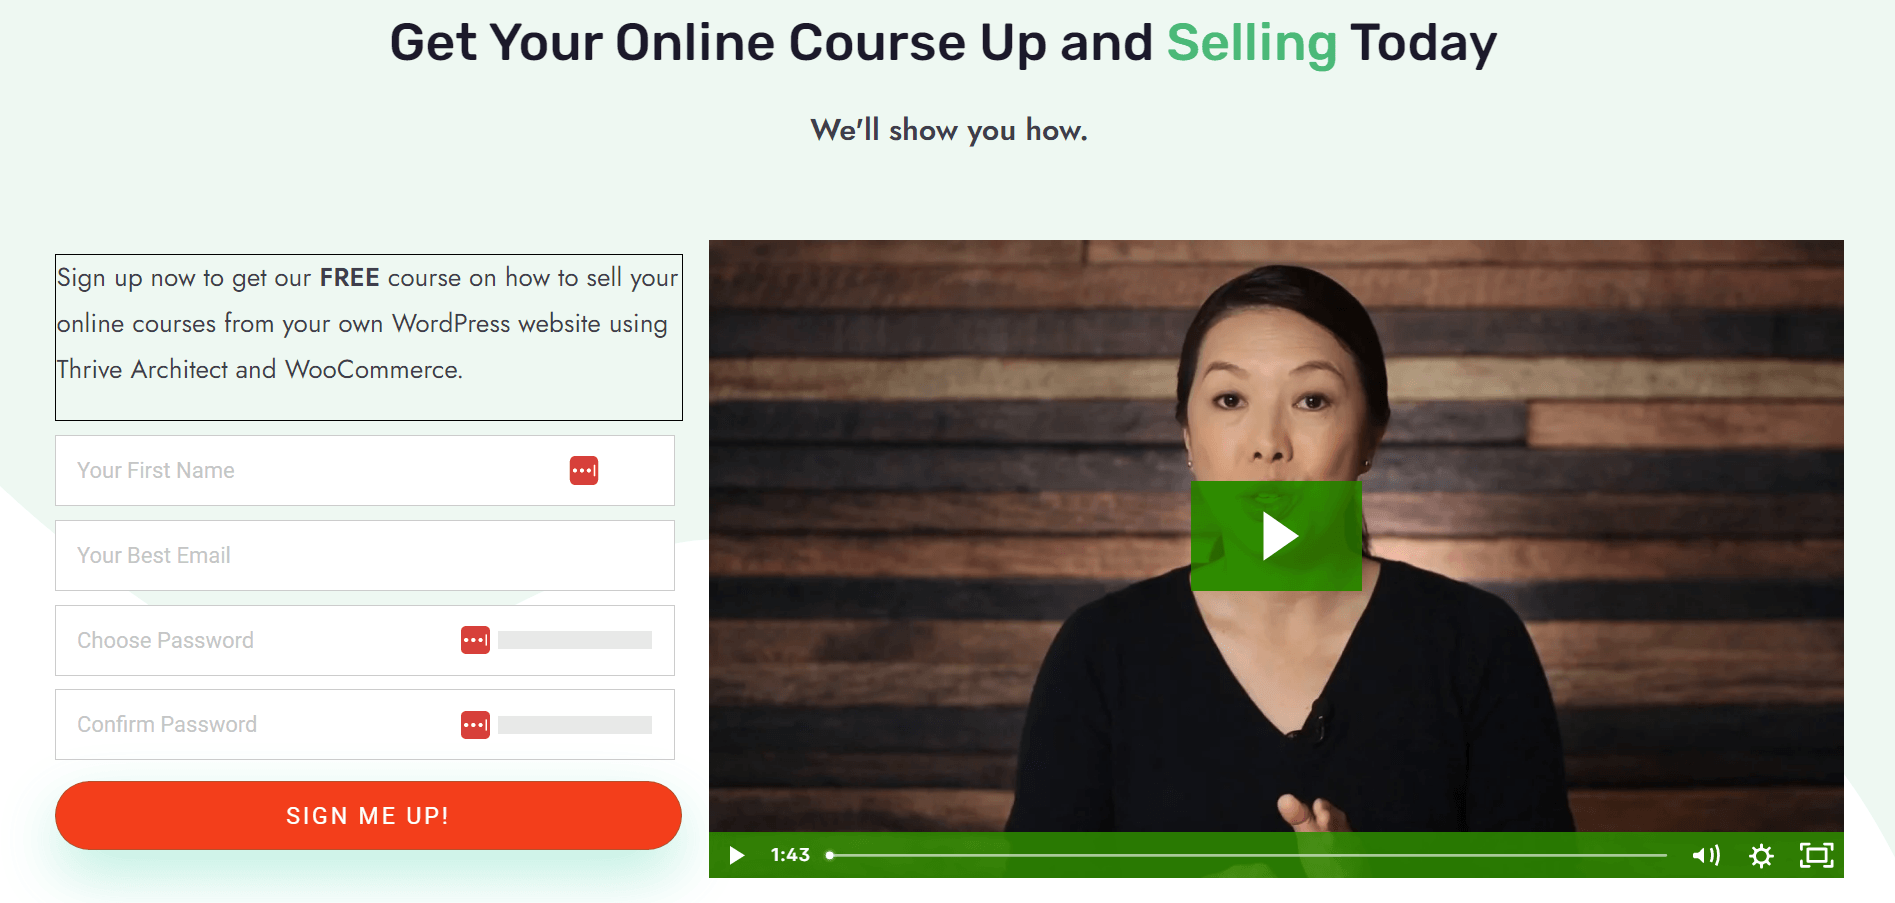 Snapshot of an online course as gated content